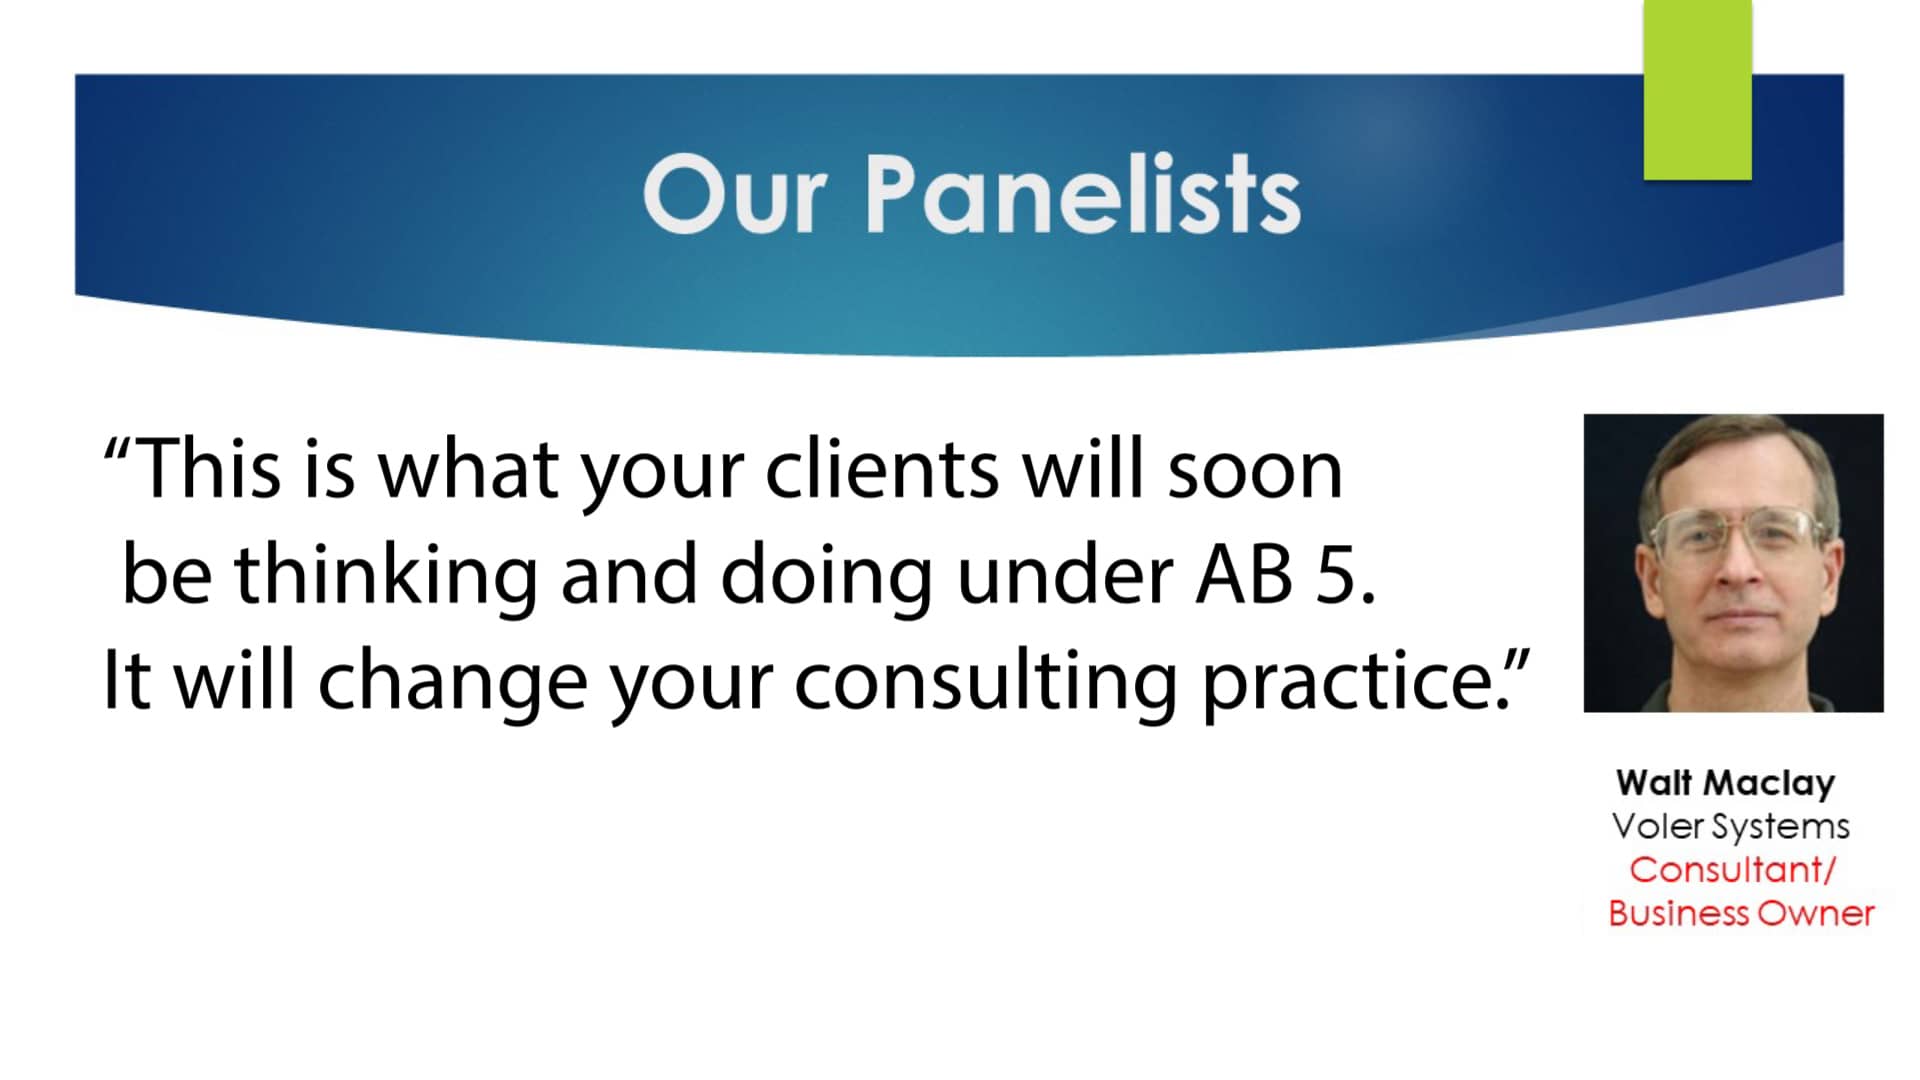 AB 5: A Consultant/Business Owner’s Perspective